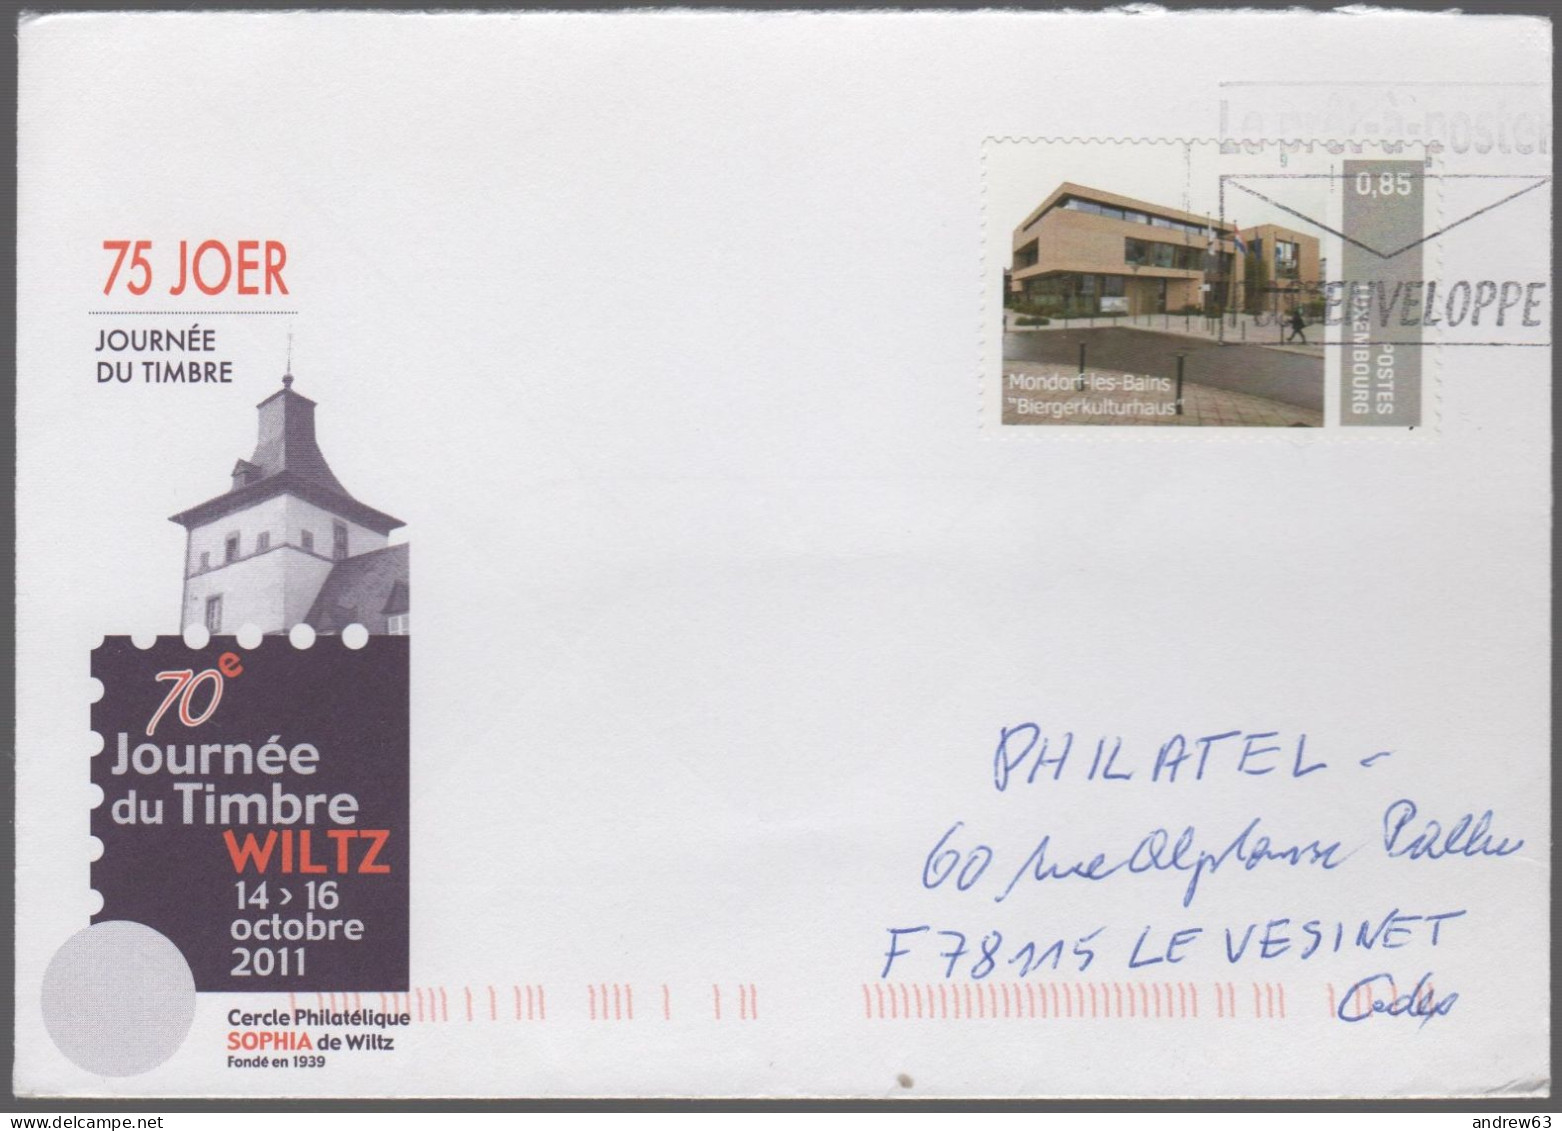 LUSSEMBURGO - LUXEMBOURG - 2011 - 0,85€ Personalised Stamp Mondorf-les-Bains + Flamme - Viaggiata Da Luxembourg Per Le V - Covers & Documents